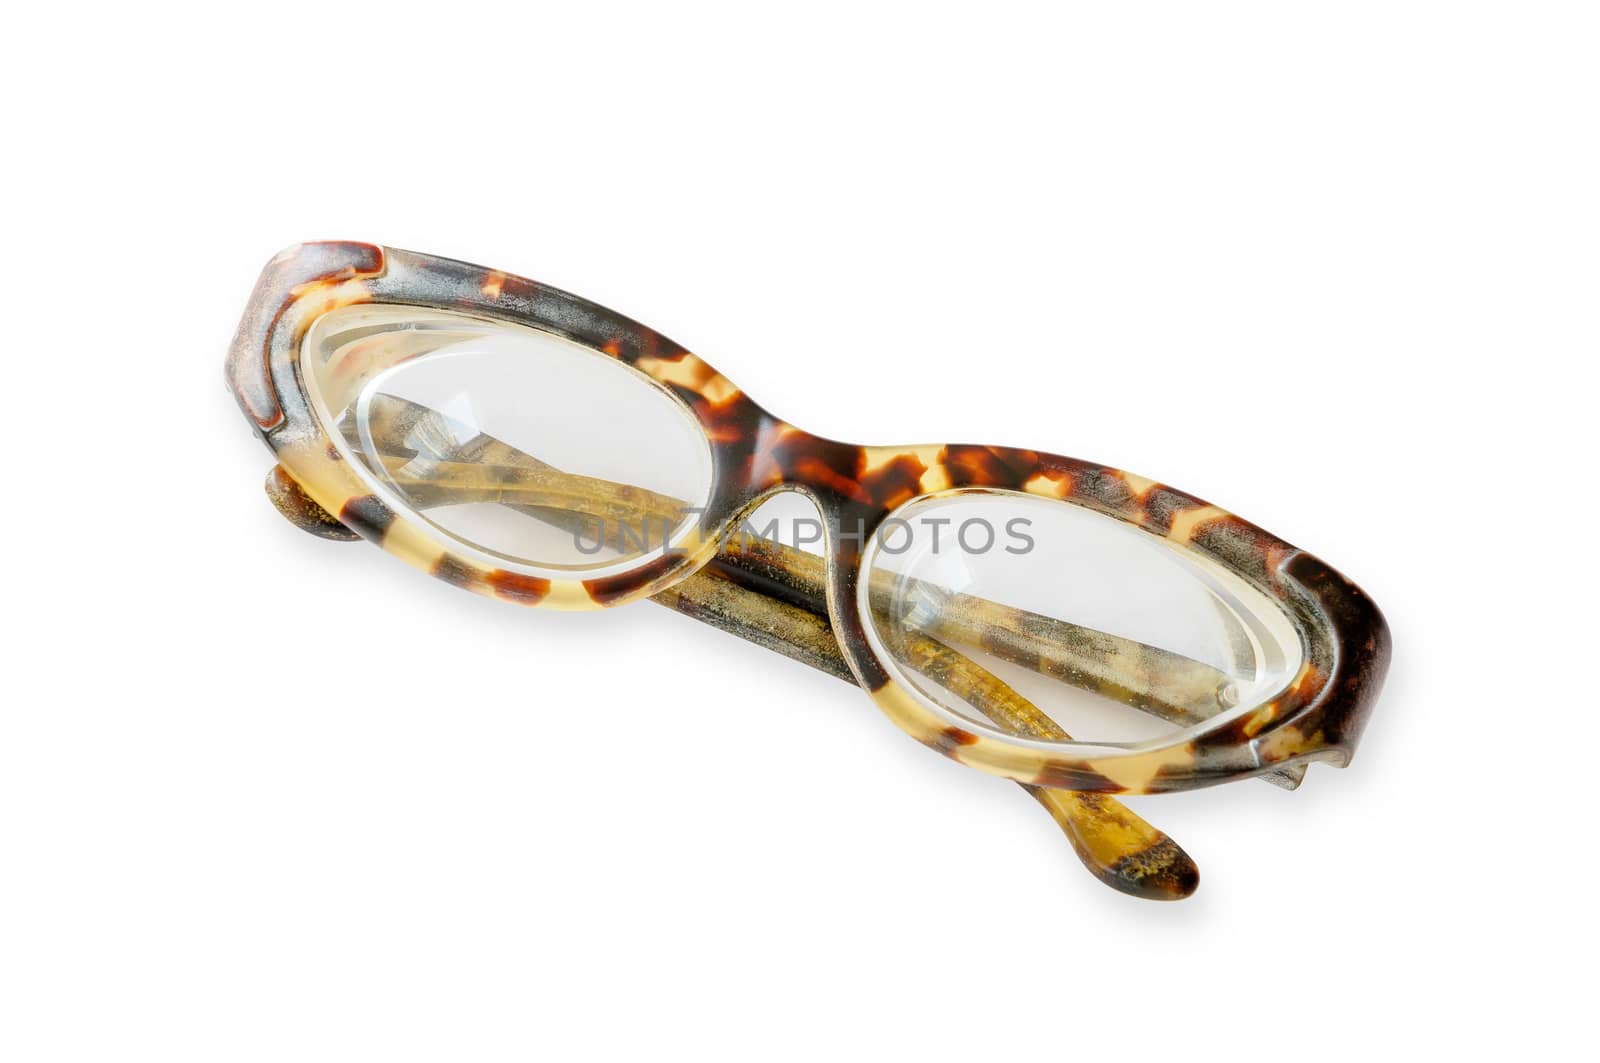 Old tortoise spectacles on a white background